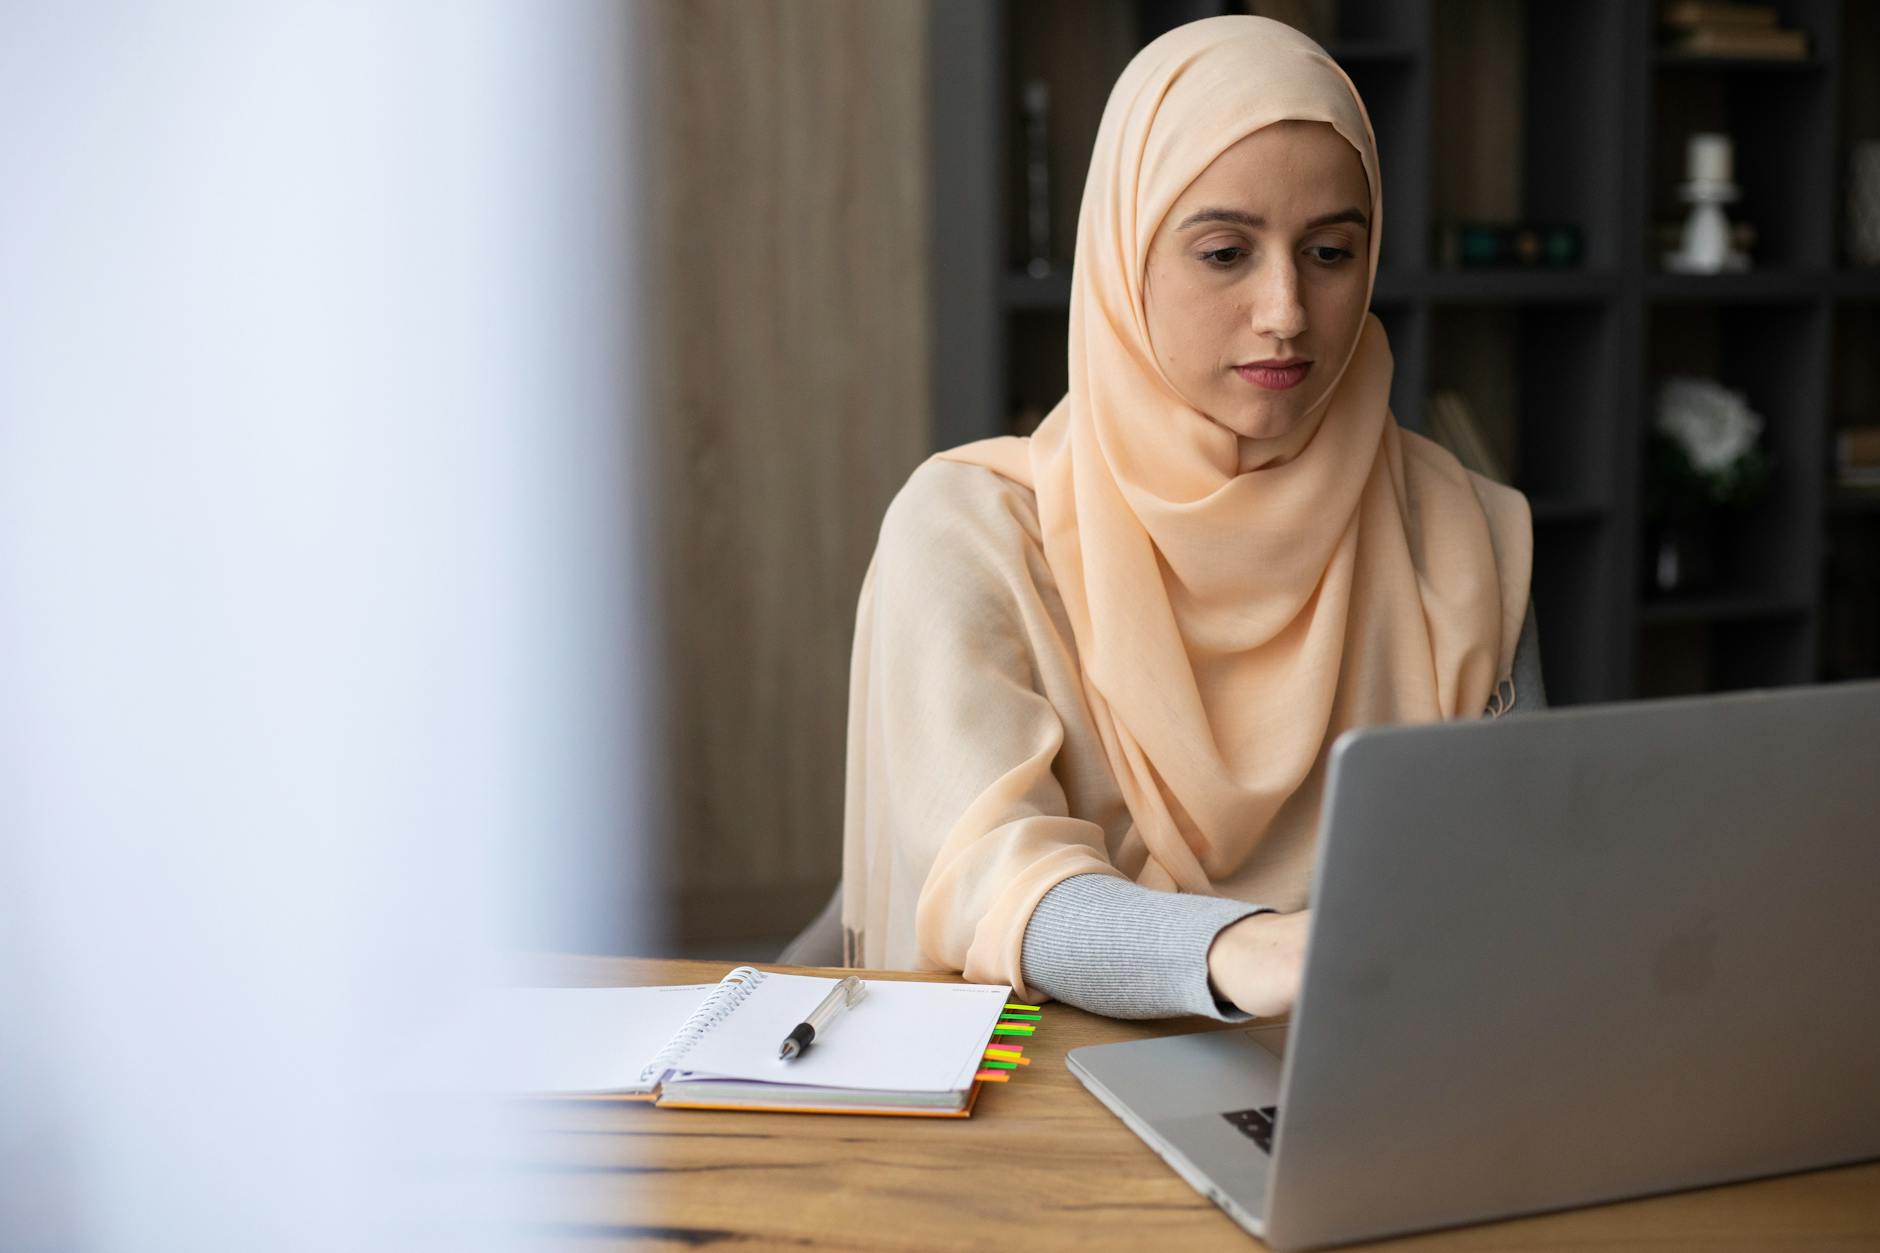 Focused young Muslim woman wearing elegant headscarf sitting at wooden table with planner and using modern laptop